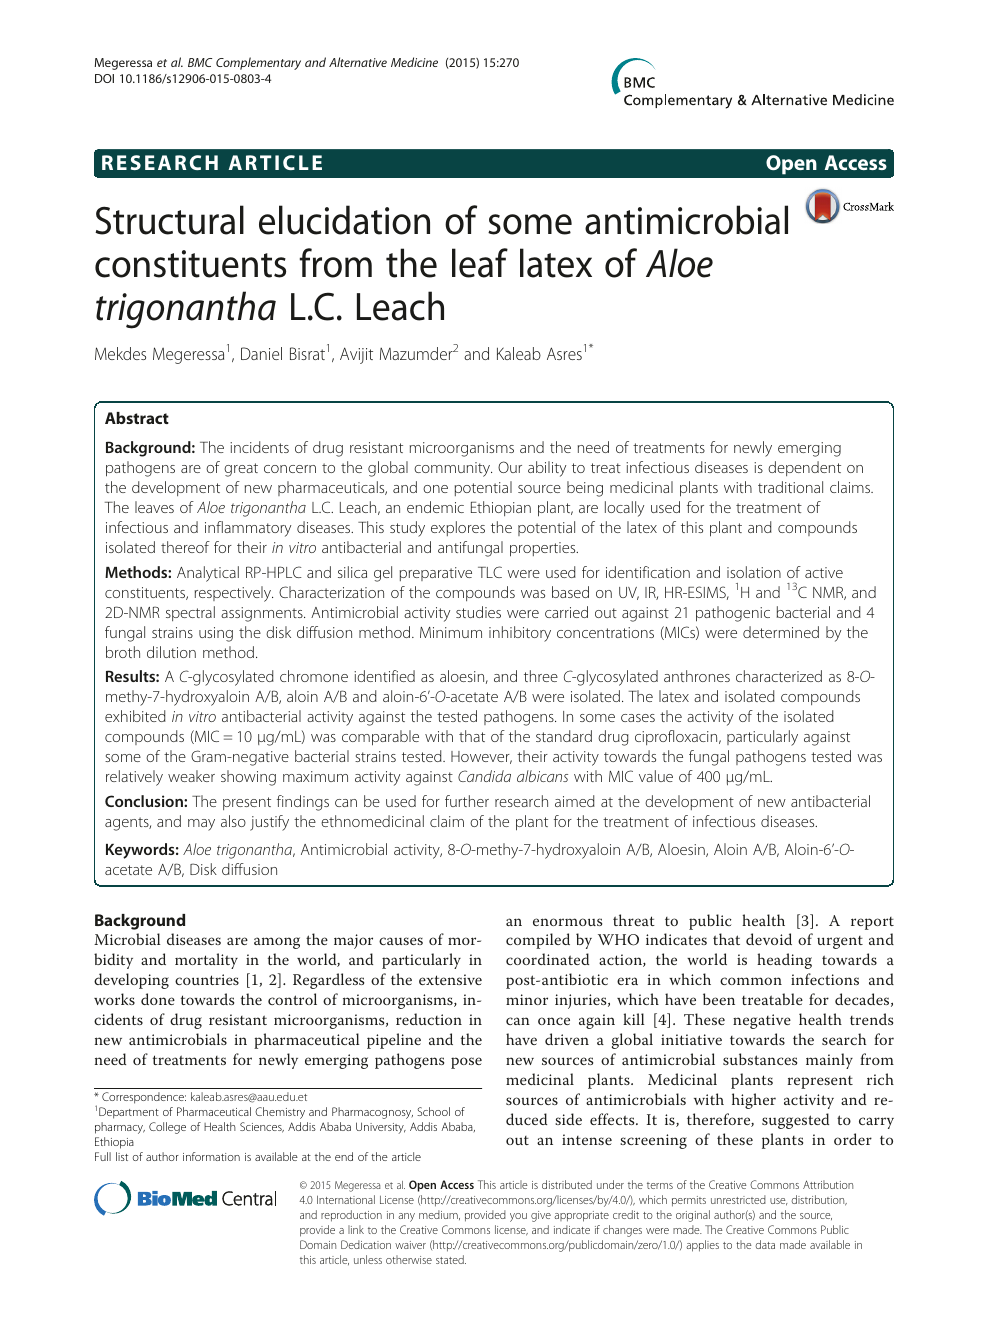 Structural Elucidation Of Some Antimicrobial Constituents From The